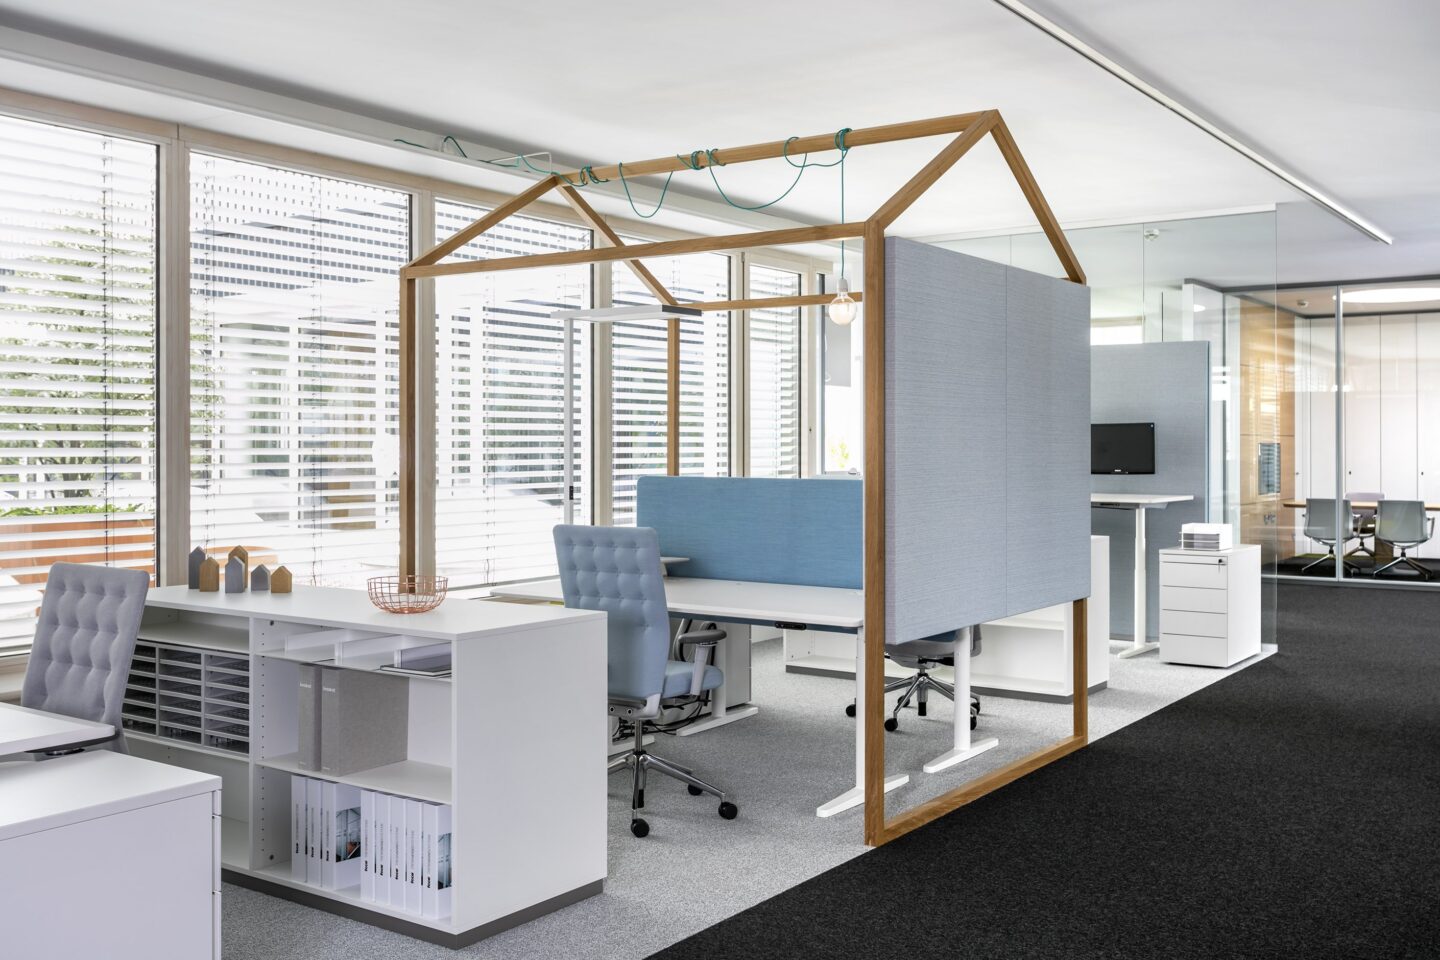 IdeenReich at feco-forum Karlsruhe │ office of the future │ acoustically effective surface